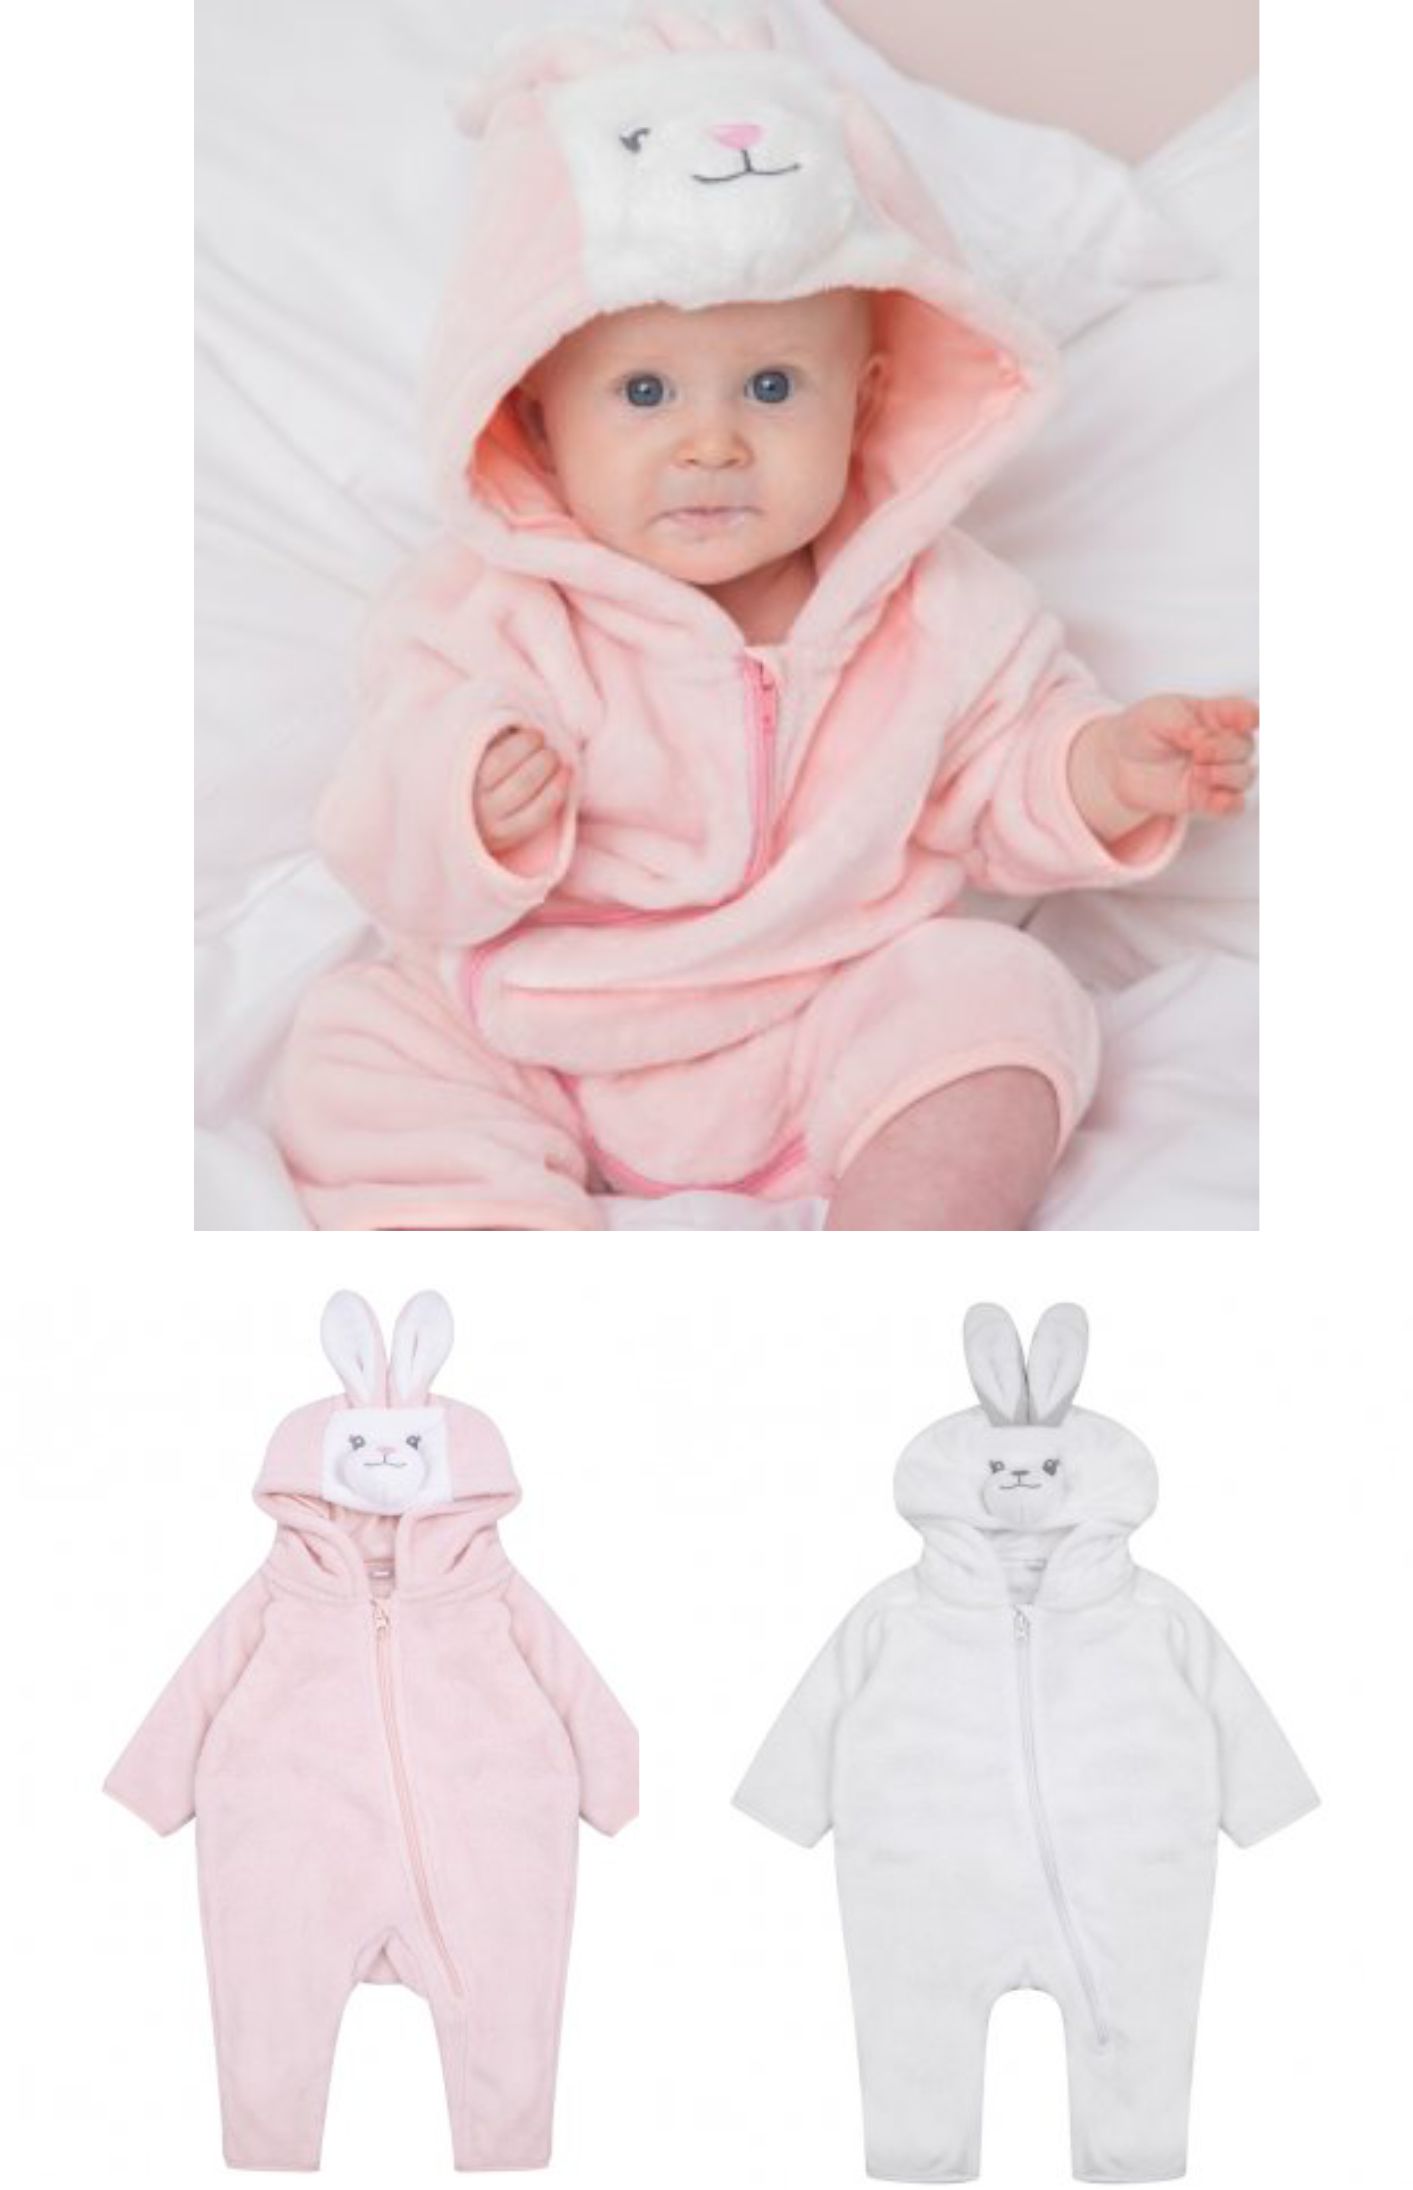 LW073T Larkwood Baby/Toddler Rabbit All In One